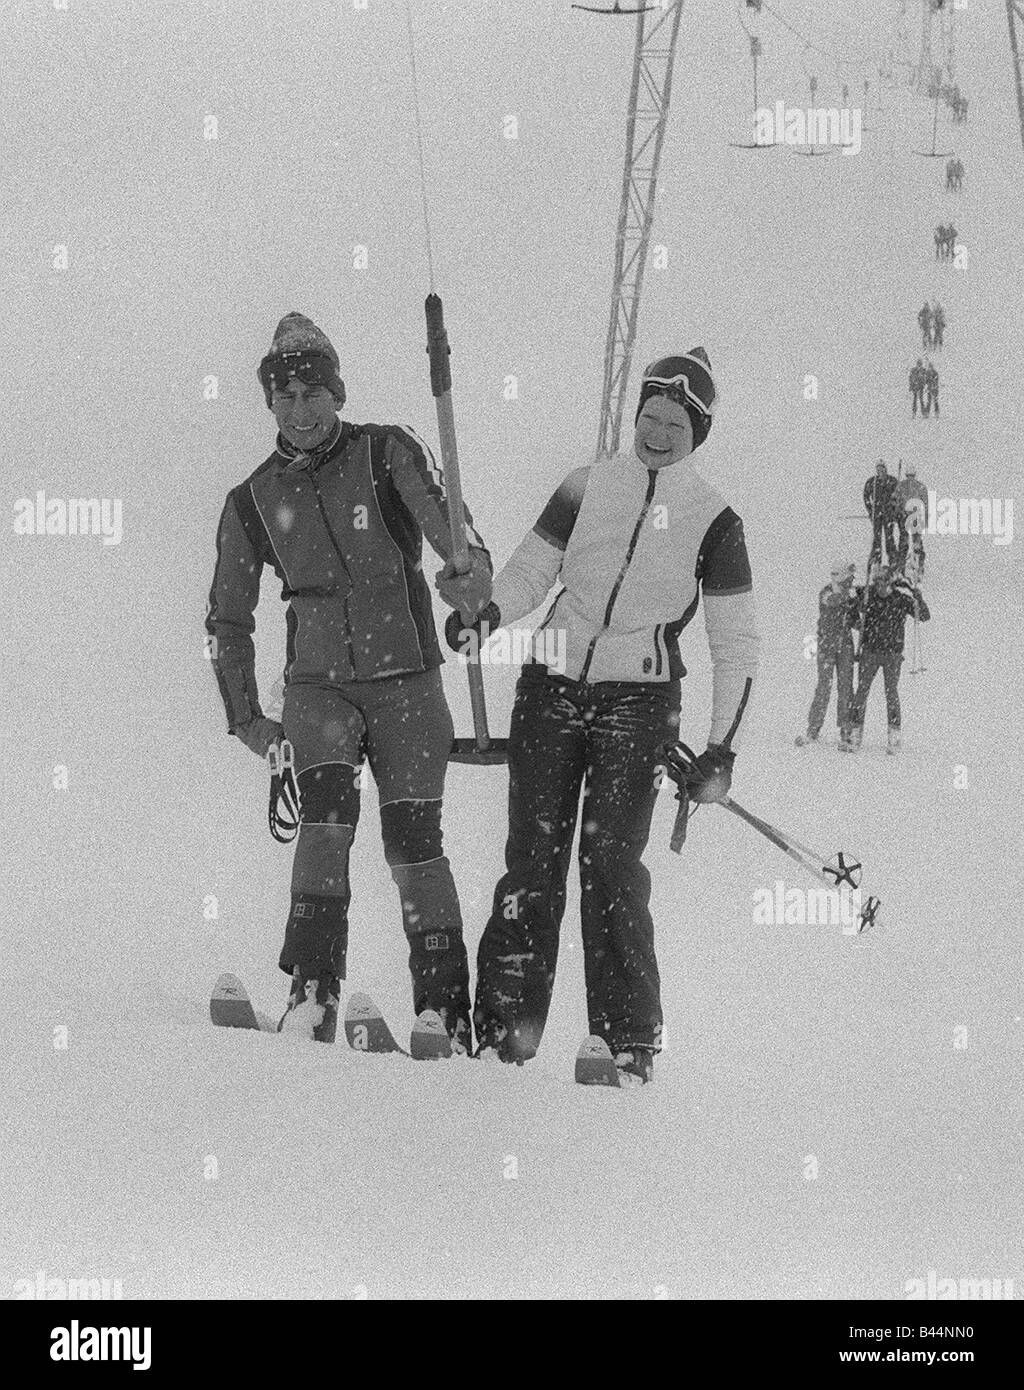 Prince Charles with Lady Sarah Spencer sharing a ski lift chair in Switzerland Wearing goggles and ski suit Stock Photo